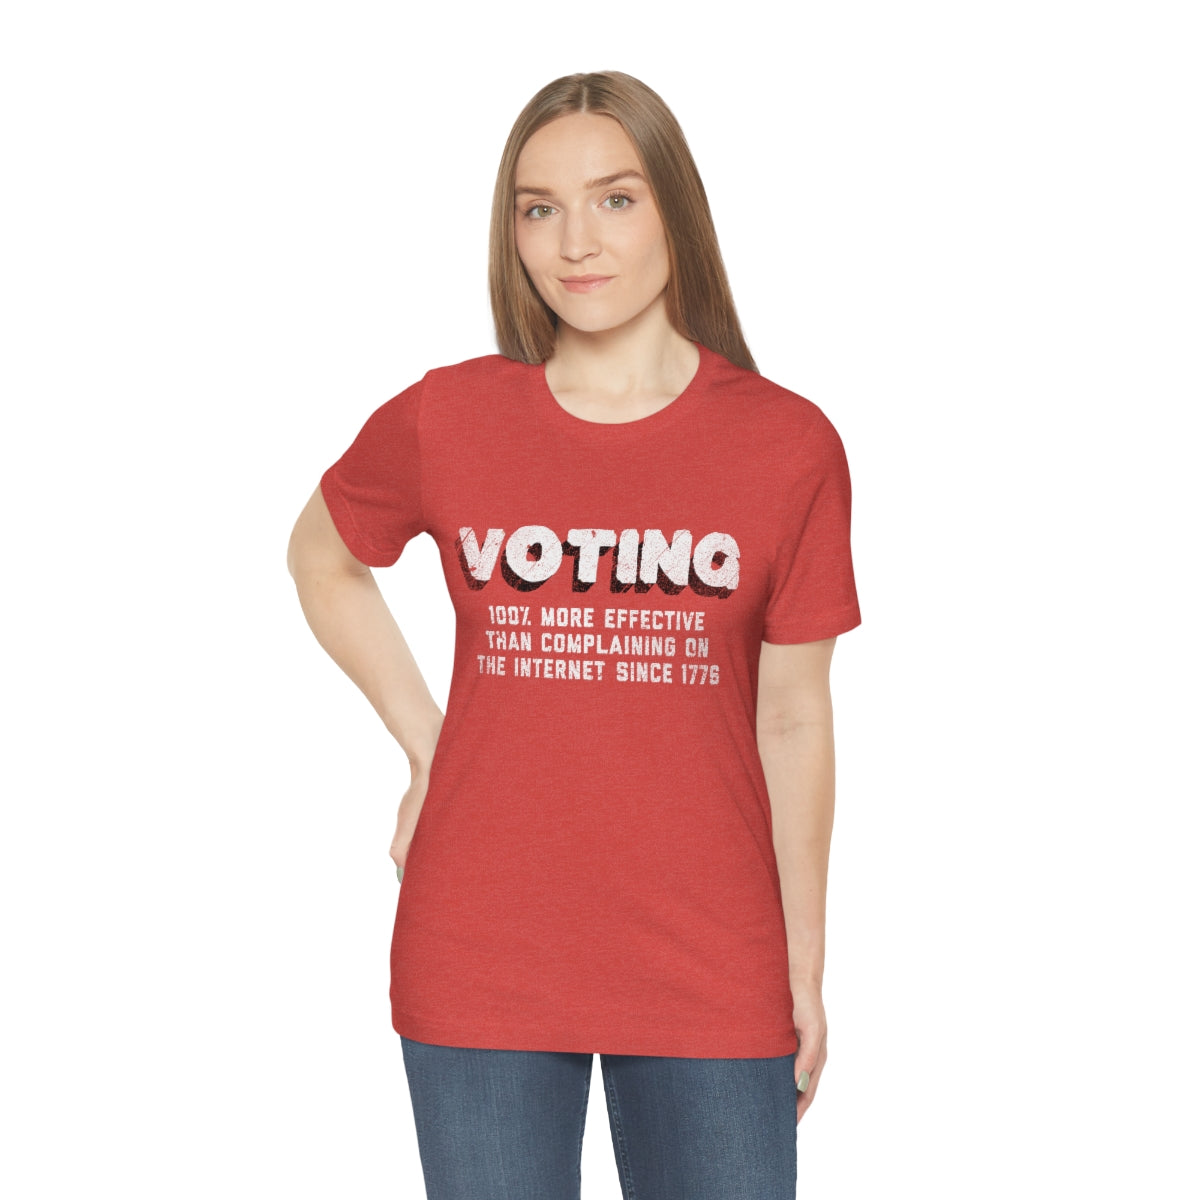 "Voting: 100% More Effective than Complaining on the Internet Since 1976" Unisex Jersey Short Sleeve Tee